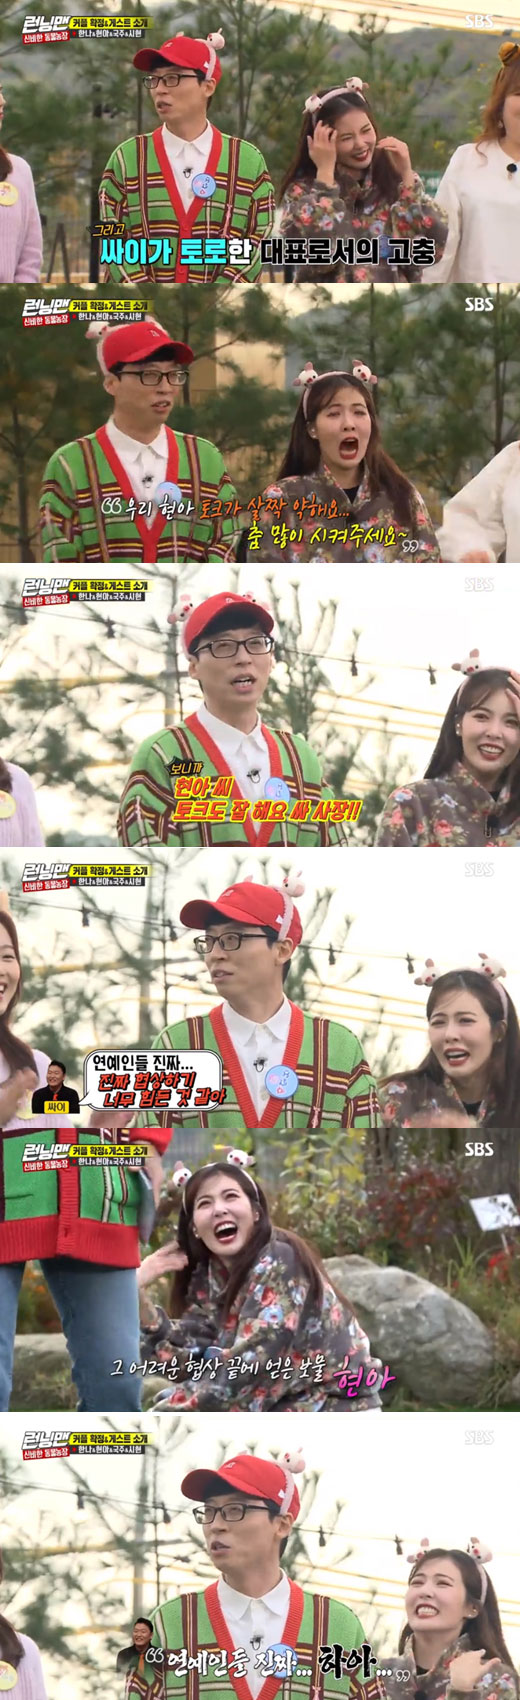 Comedian Yoo Jae-Suk confessed to the conversation he had with singer PSY.In the SBS entertainment program Running Man broadcasted on the 10th, singer Hyona, gag woman Lee Guk-ju and girl group Everglow member Sihyun appeared as guests along with Kang.On this day, Yoo Jae-Suk asked Hyuna, who appeared as a guest, about his current situation and said, Is not the president of the company PSY?I met him a few days ago, and PSY asked me to do Hyuna nicely, do not say a lot, do a lot of dancing.In addition, Yoo Jae-Suk added the grievances mentioned by PSY, PSY talked again.When I became president, entertainers really Movie - The Negotiation is hard, I am an entertainer, but entertainers are really hard to talk about, he laughed.